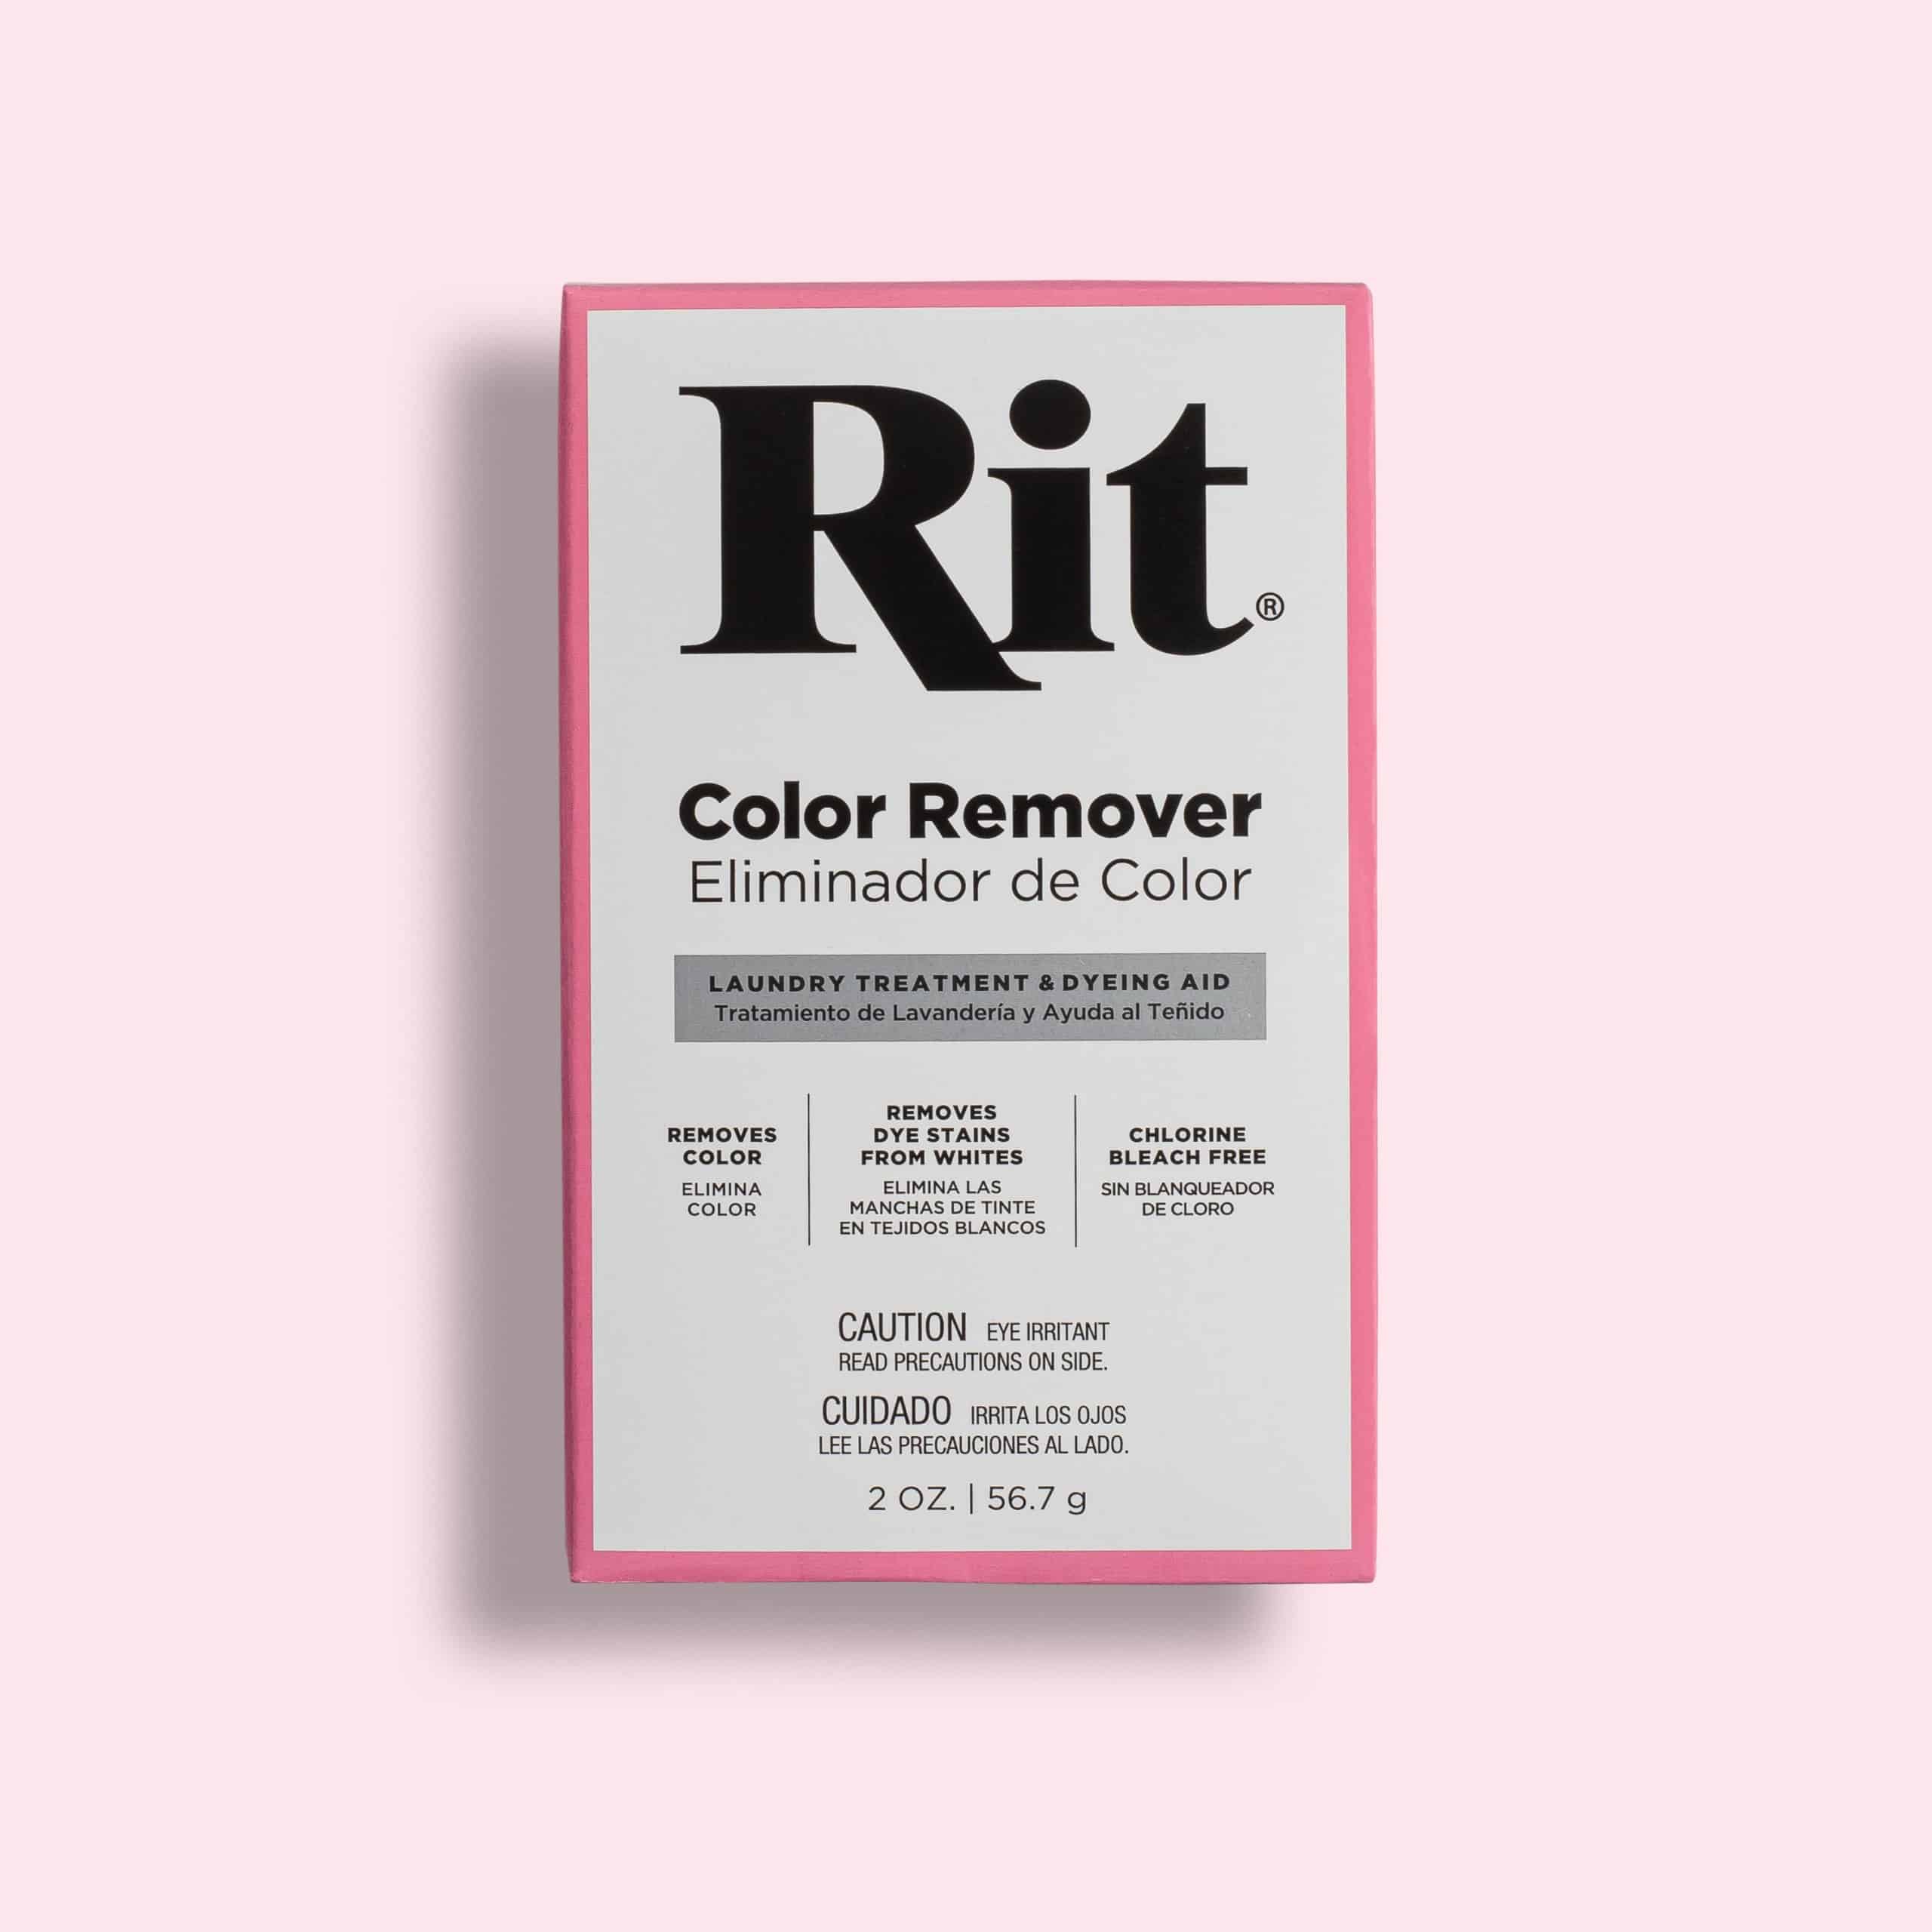 using rit color remover on grey clothes｜TikTok Search